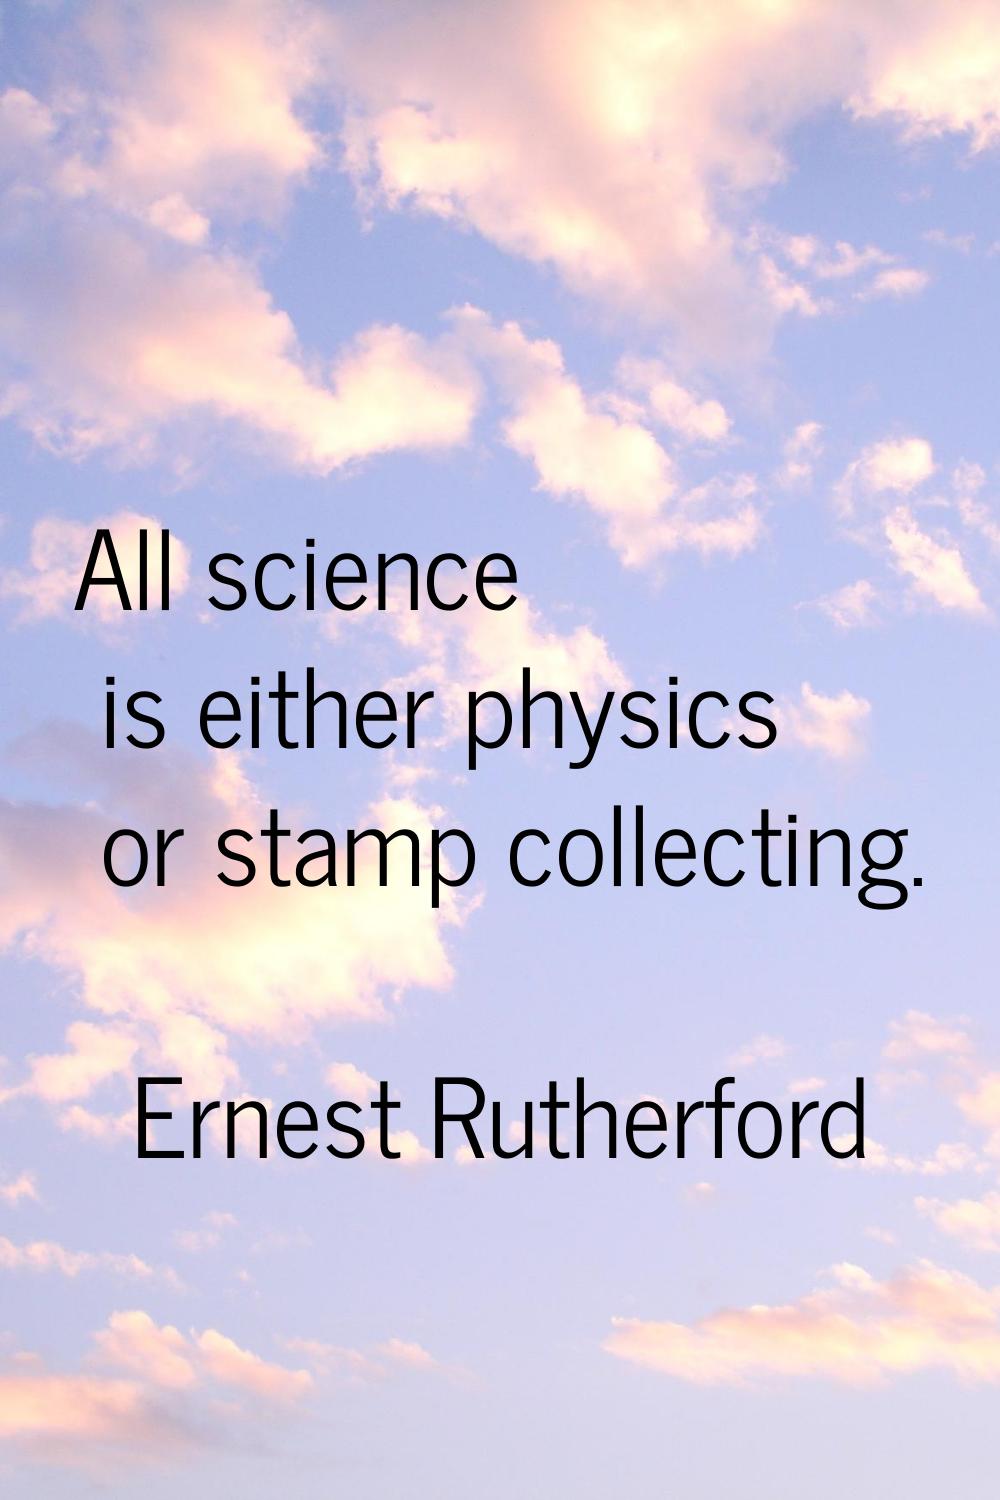 All science is either physics or stamp collecting.